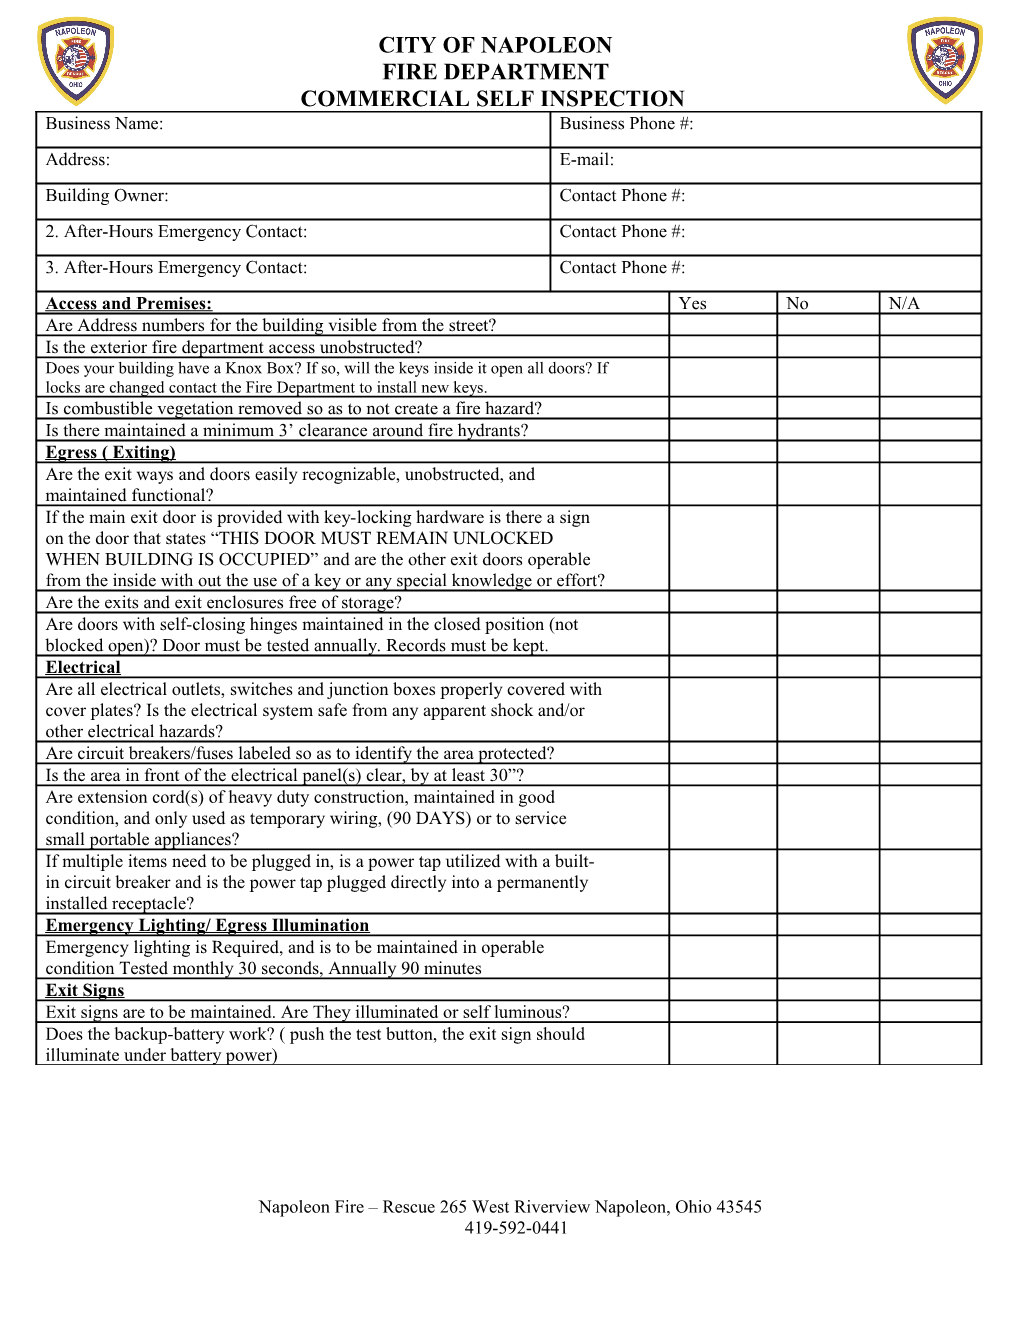 Self-Fire Inspection Form